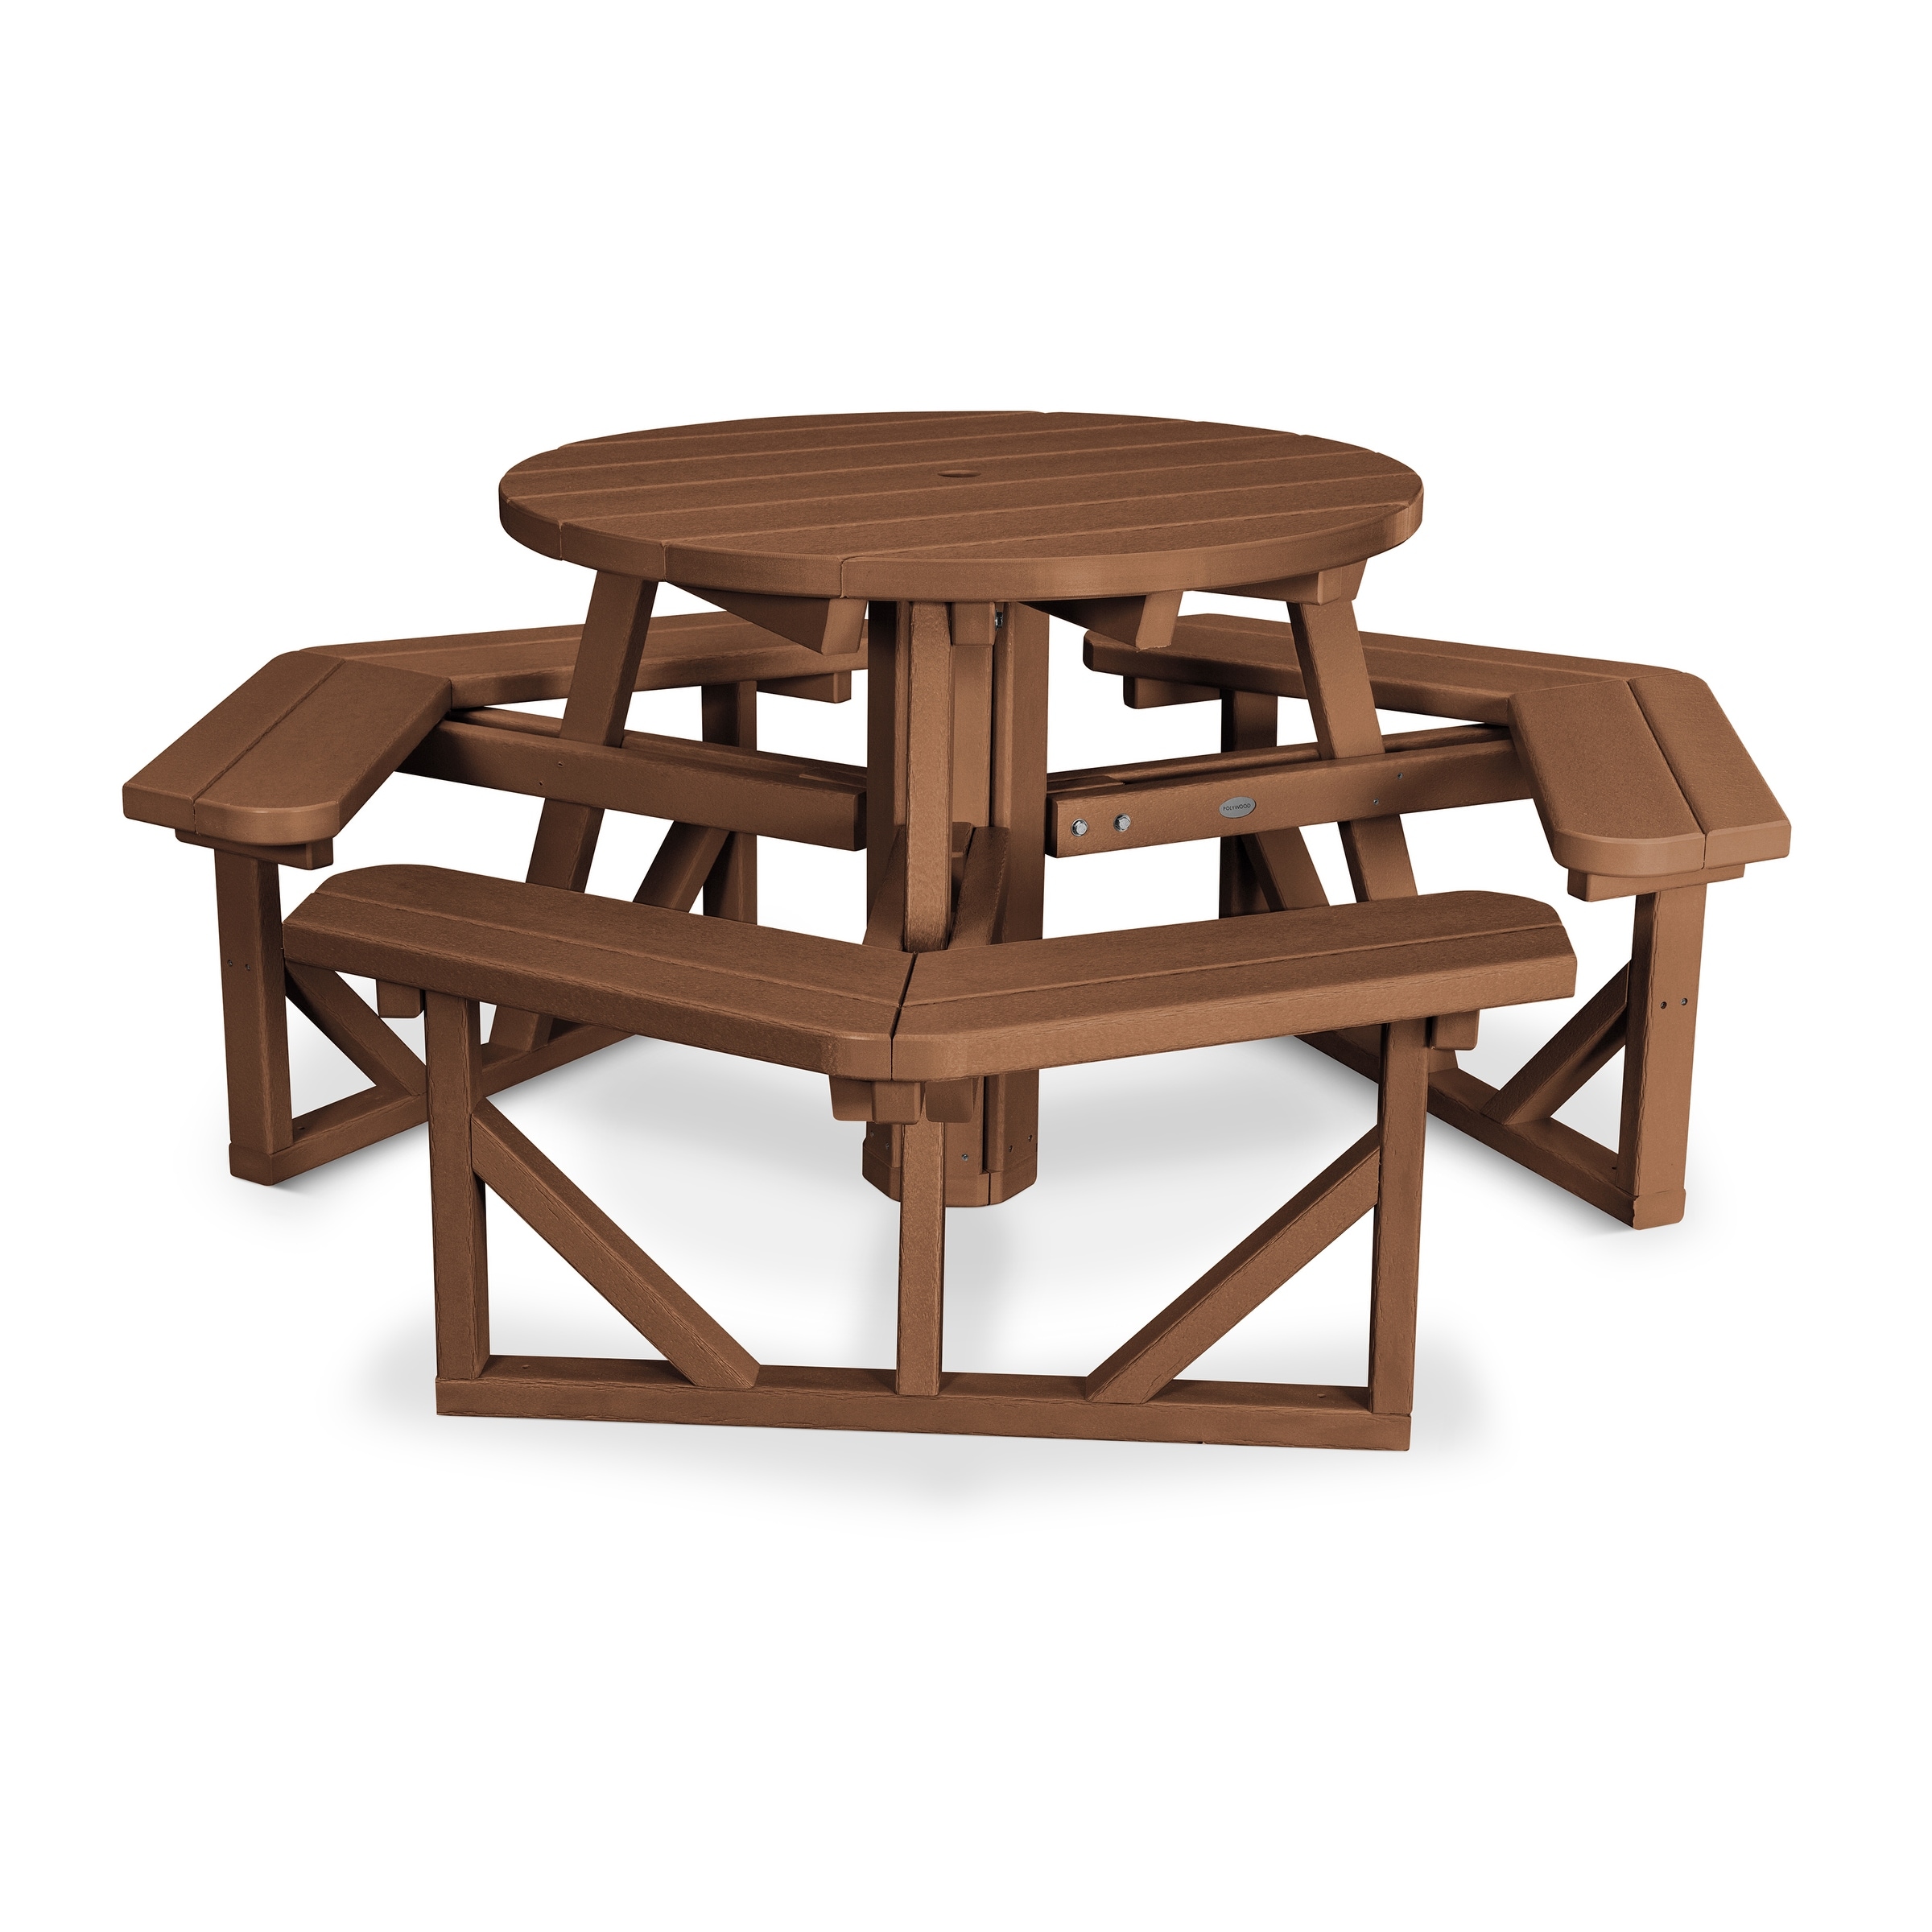 Polywood Park 36 Round Picnic Table